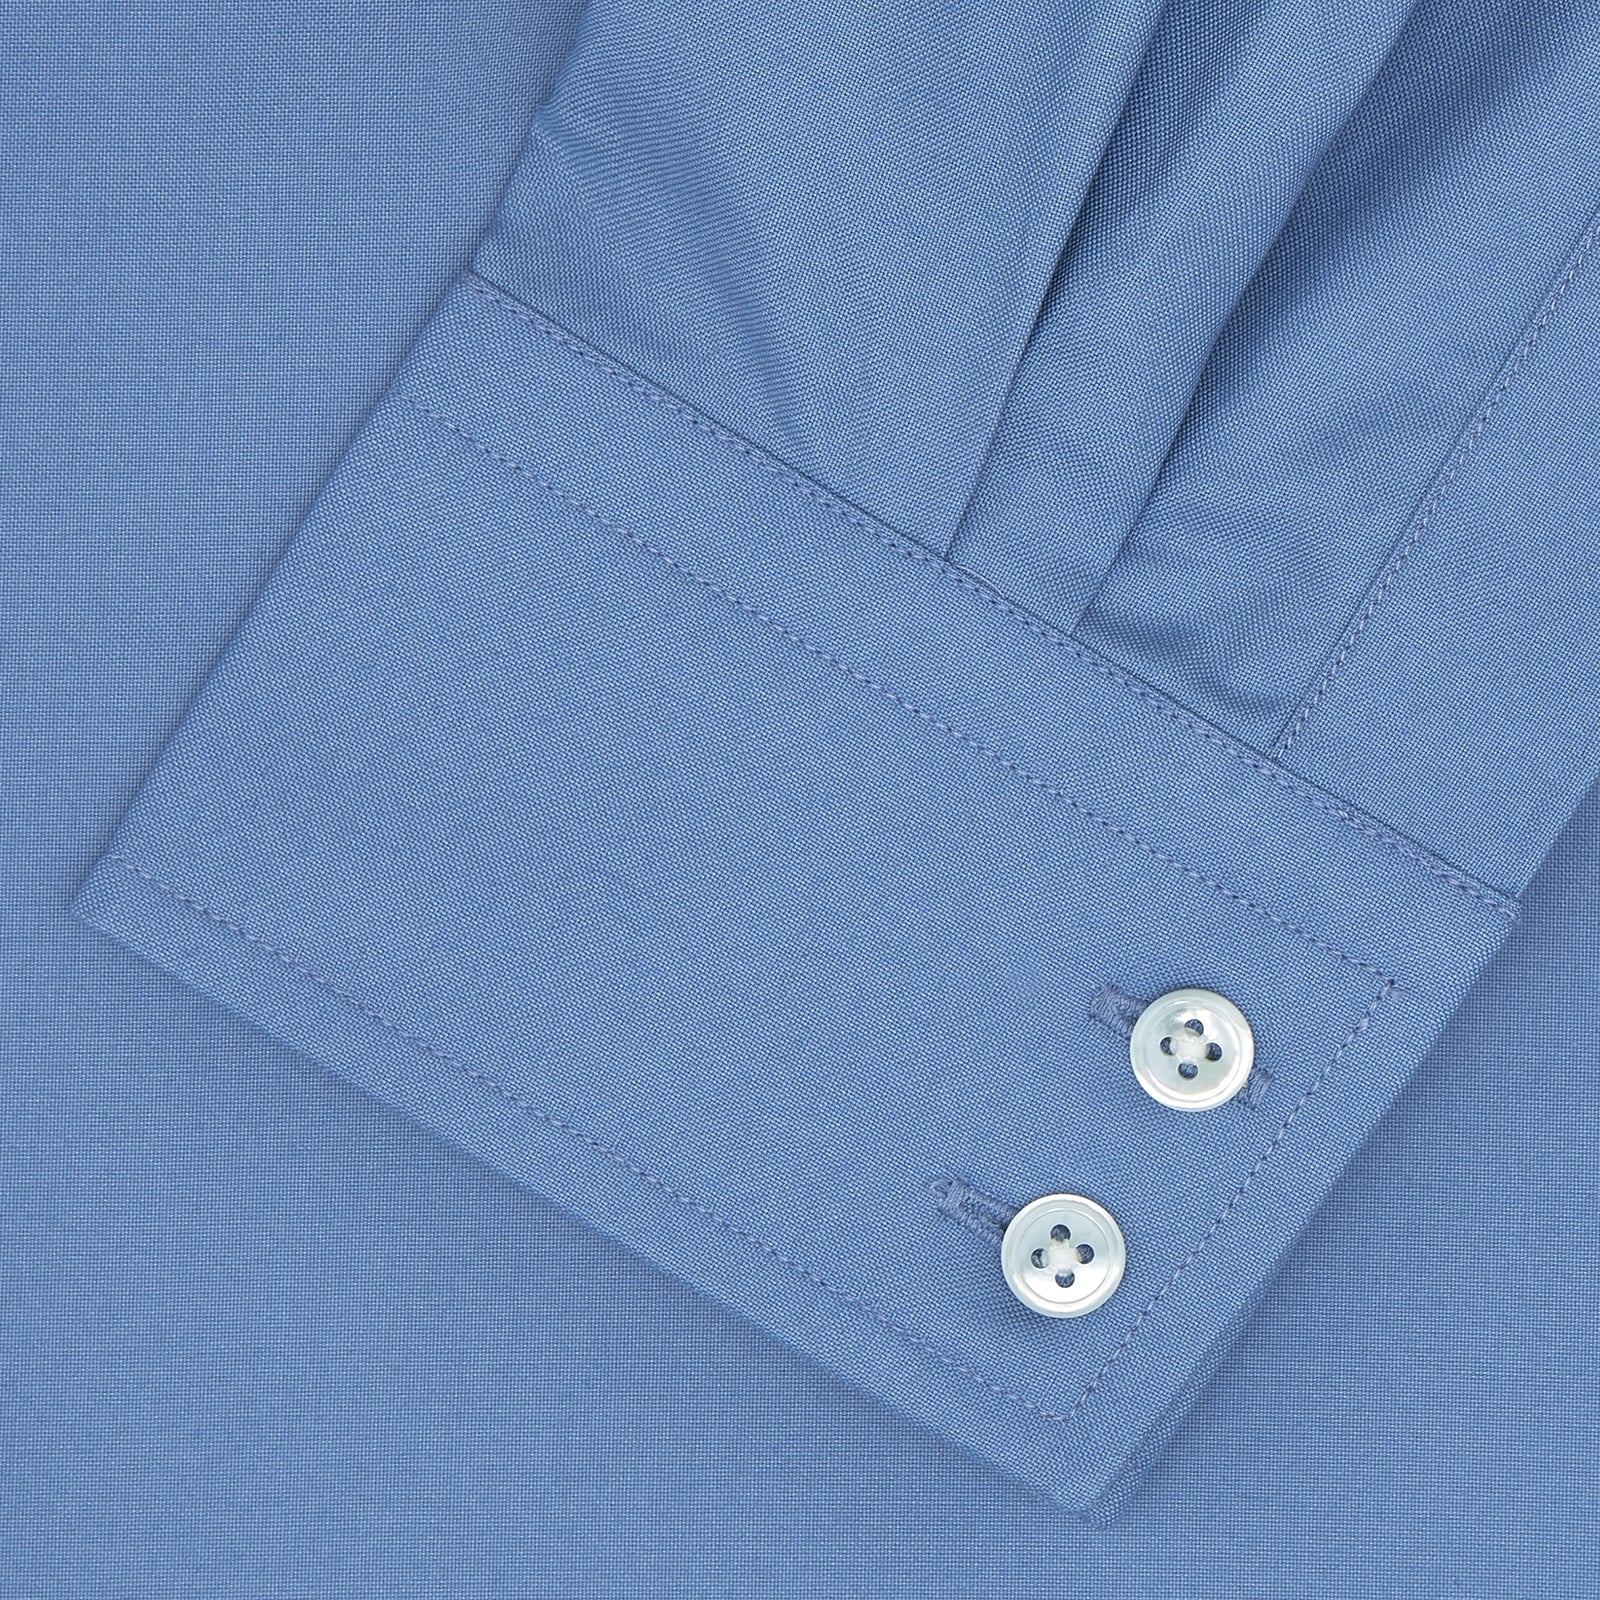 Tailored Fit Deep Blue Cotton Shirt with Kent Collar and 2-Button Cuffs